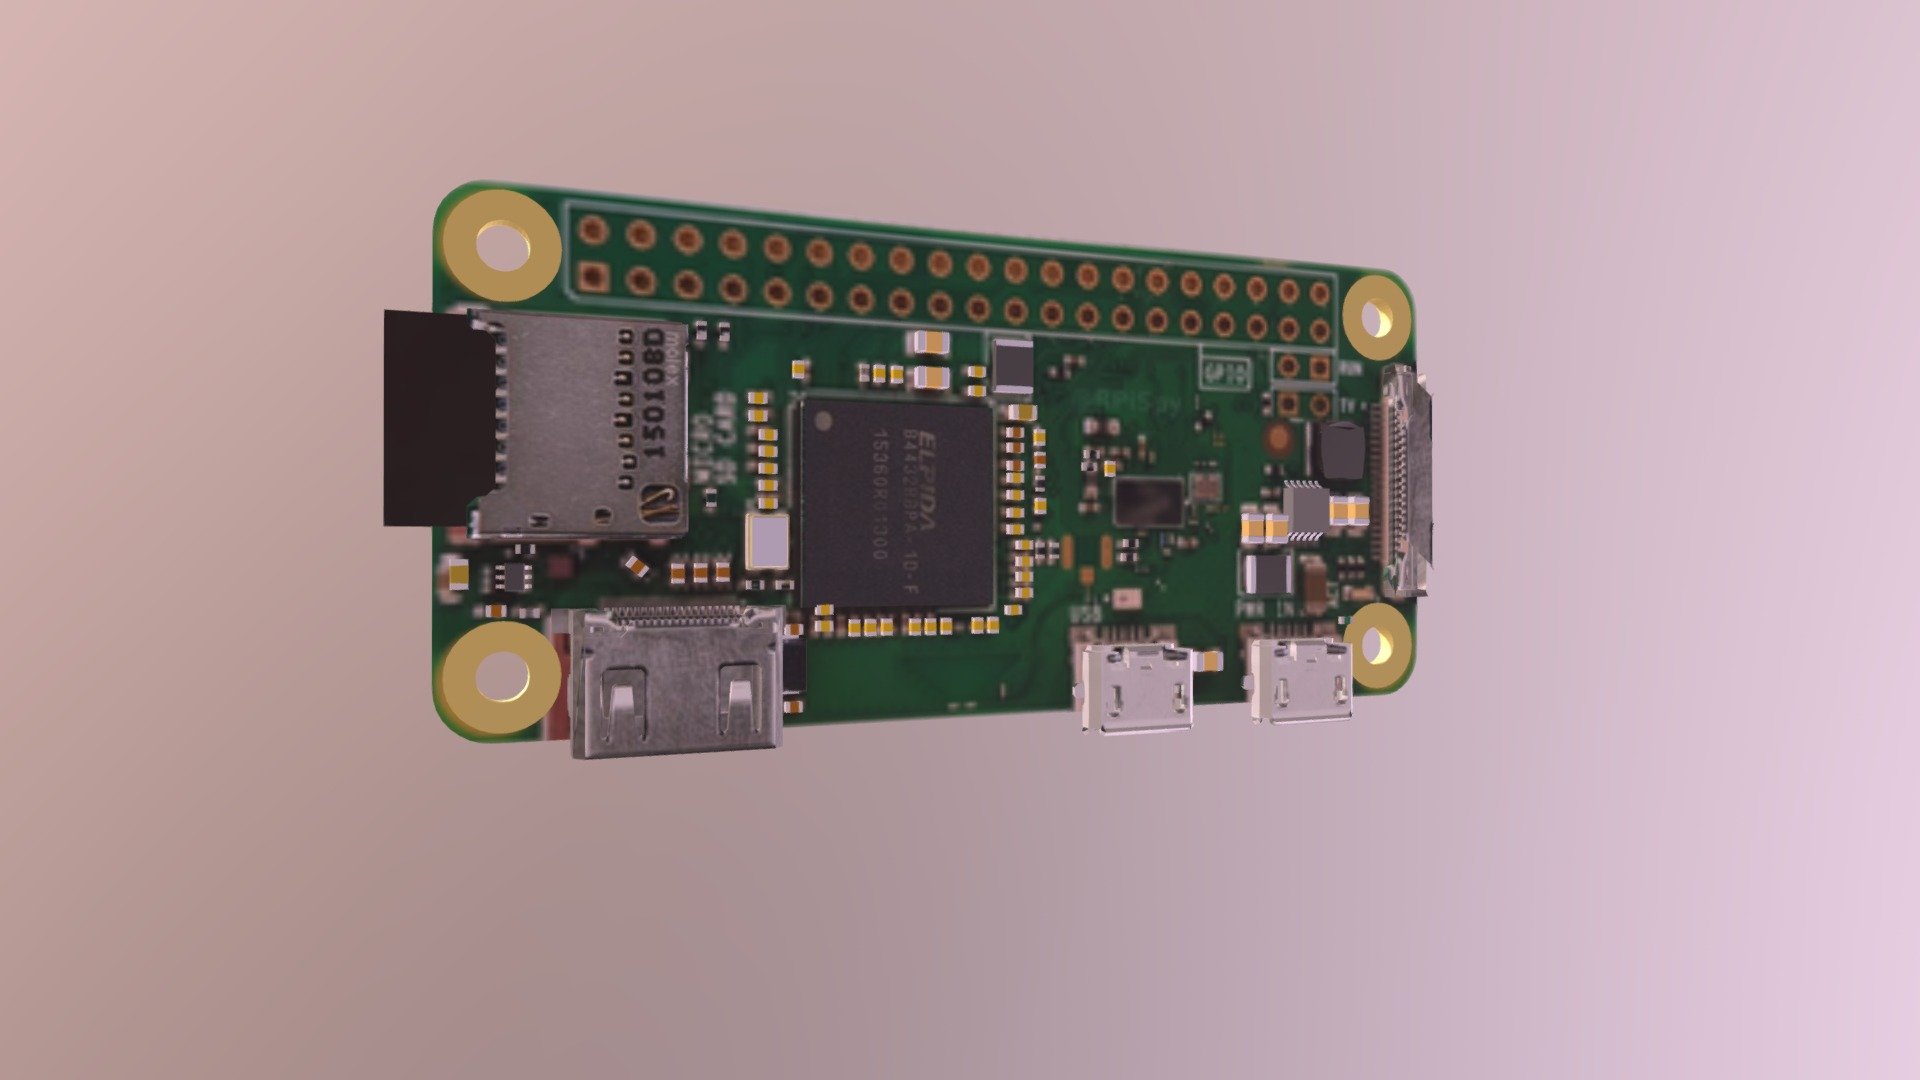 Uses references from: https://grabcad.com/library/raspberry-pi-zero-w-board-1
  by Vittorinco

https://learn.sparkfun.com/tutorials/getting-started-with-the-raspberry-pi-zero-wireless

https://www.raspberrypi.org/documentation/hardware/raspberrypi/mechanical/README.md

https://www.raspberrypi.org/documentation/hardware/raspberrypi/mechanical/rpi_MECH_Zero_1p3.pdf - Raspberry Pi Zero W v1.1 - Download Free 3D model by Vacui (@HunterVacui) 3d model